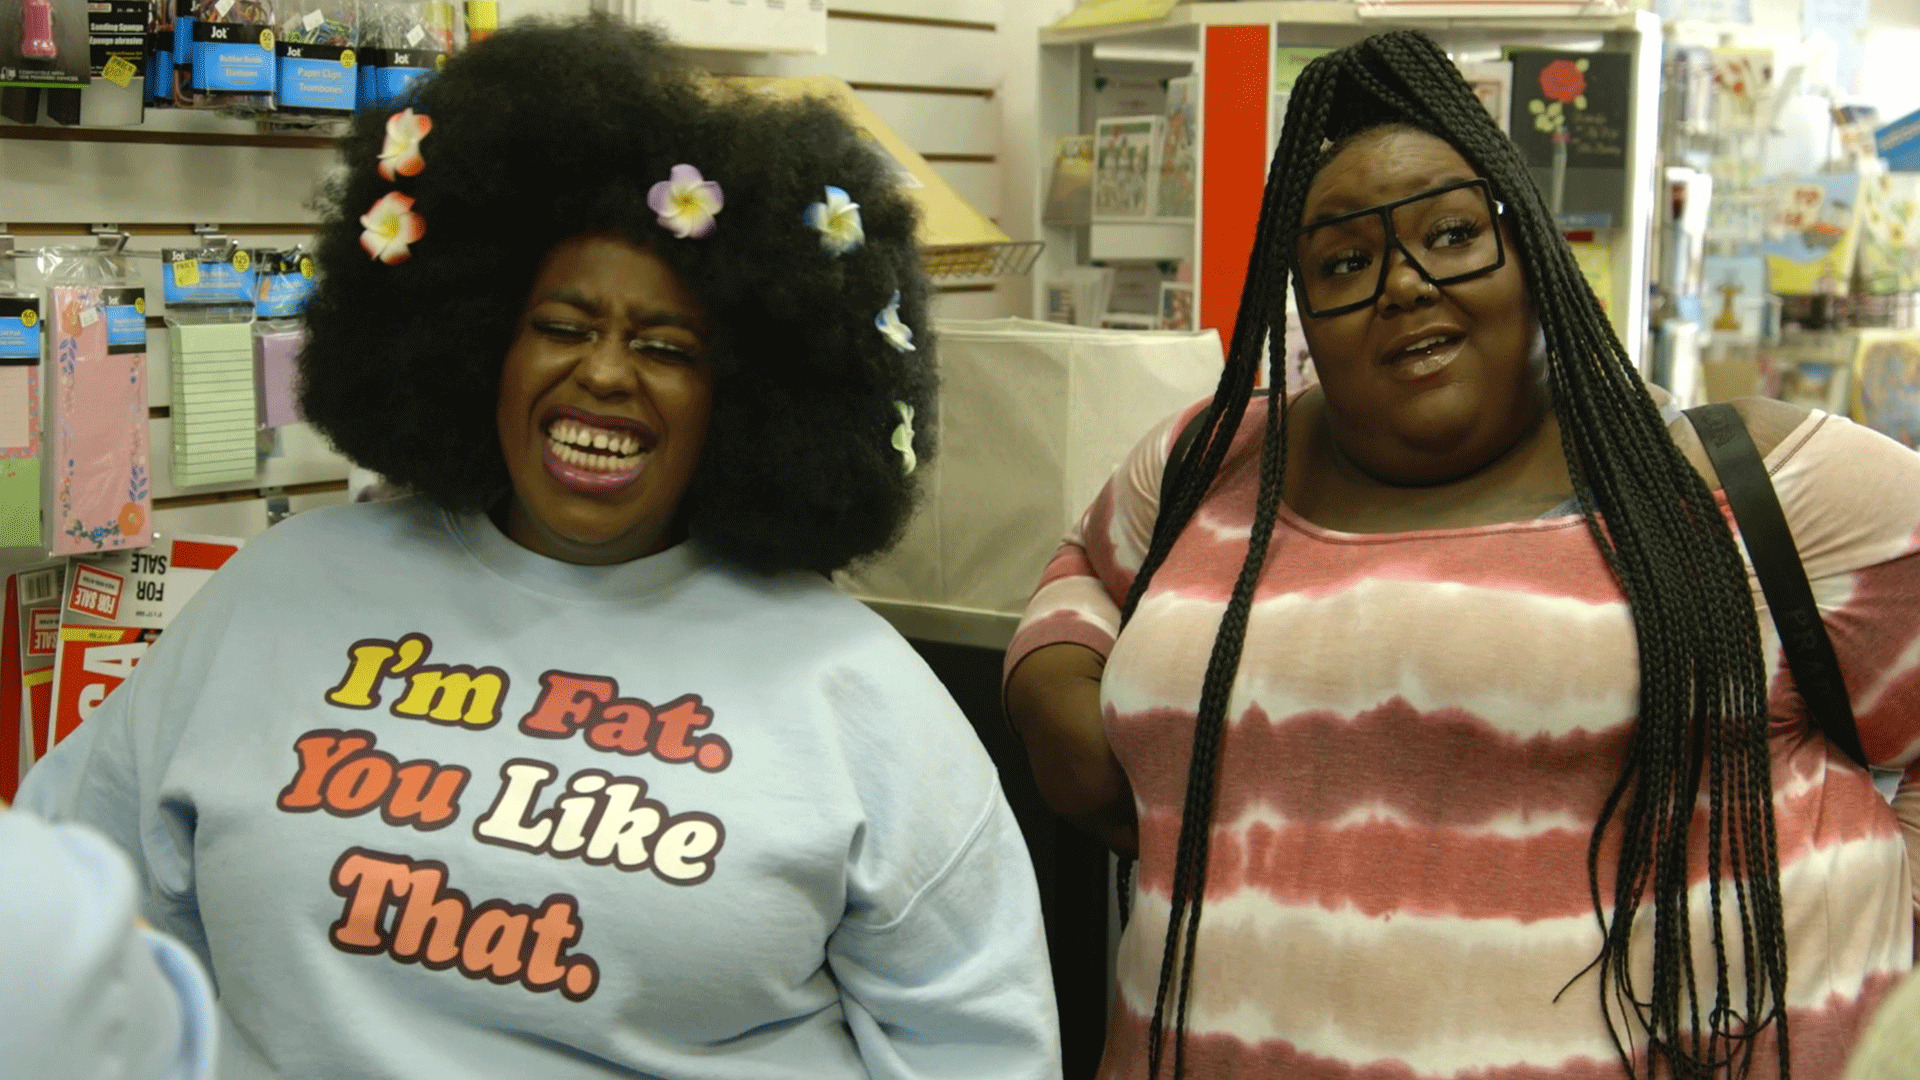 Watch Deleted Scene: Babydoll Beauty Couture Needs Promo! | Super Sized Salon Video Extras